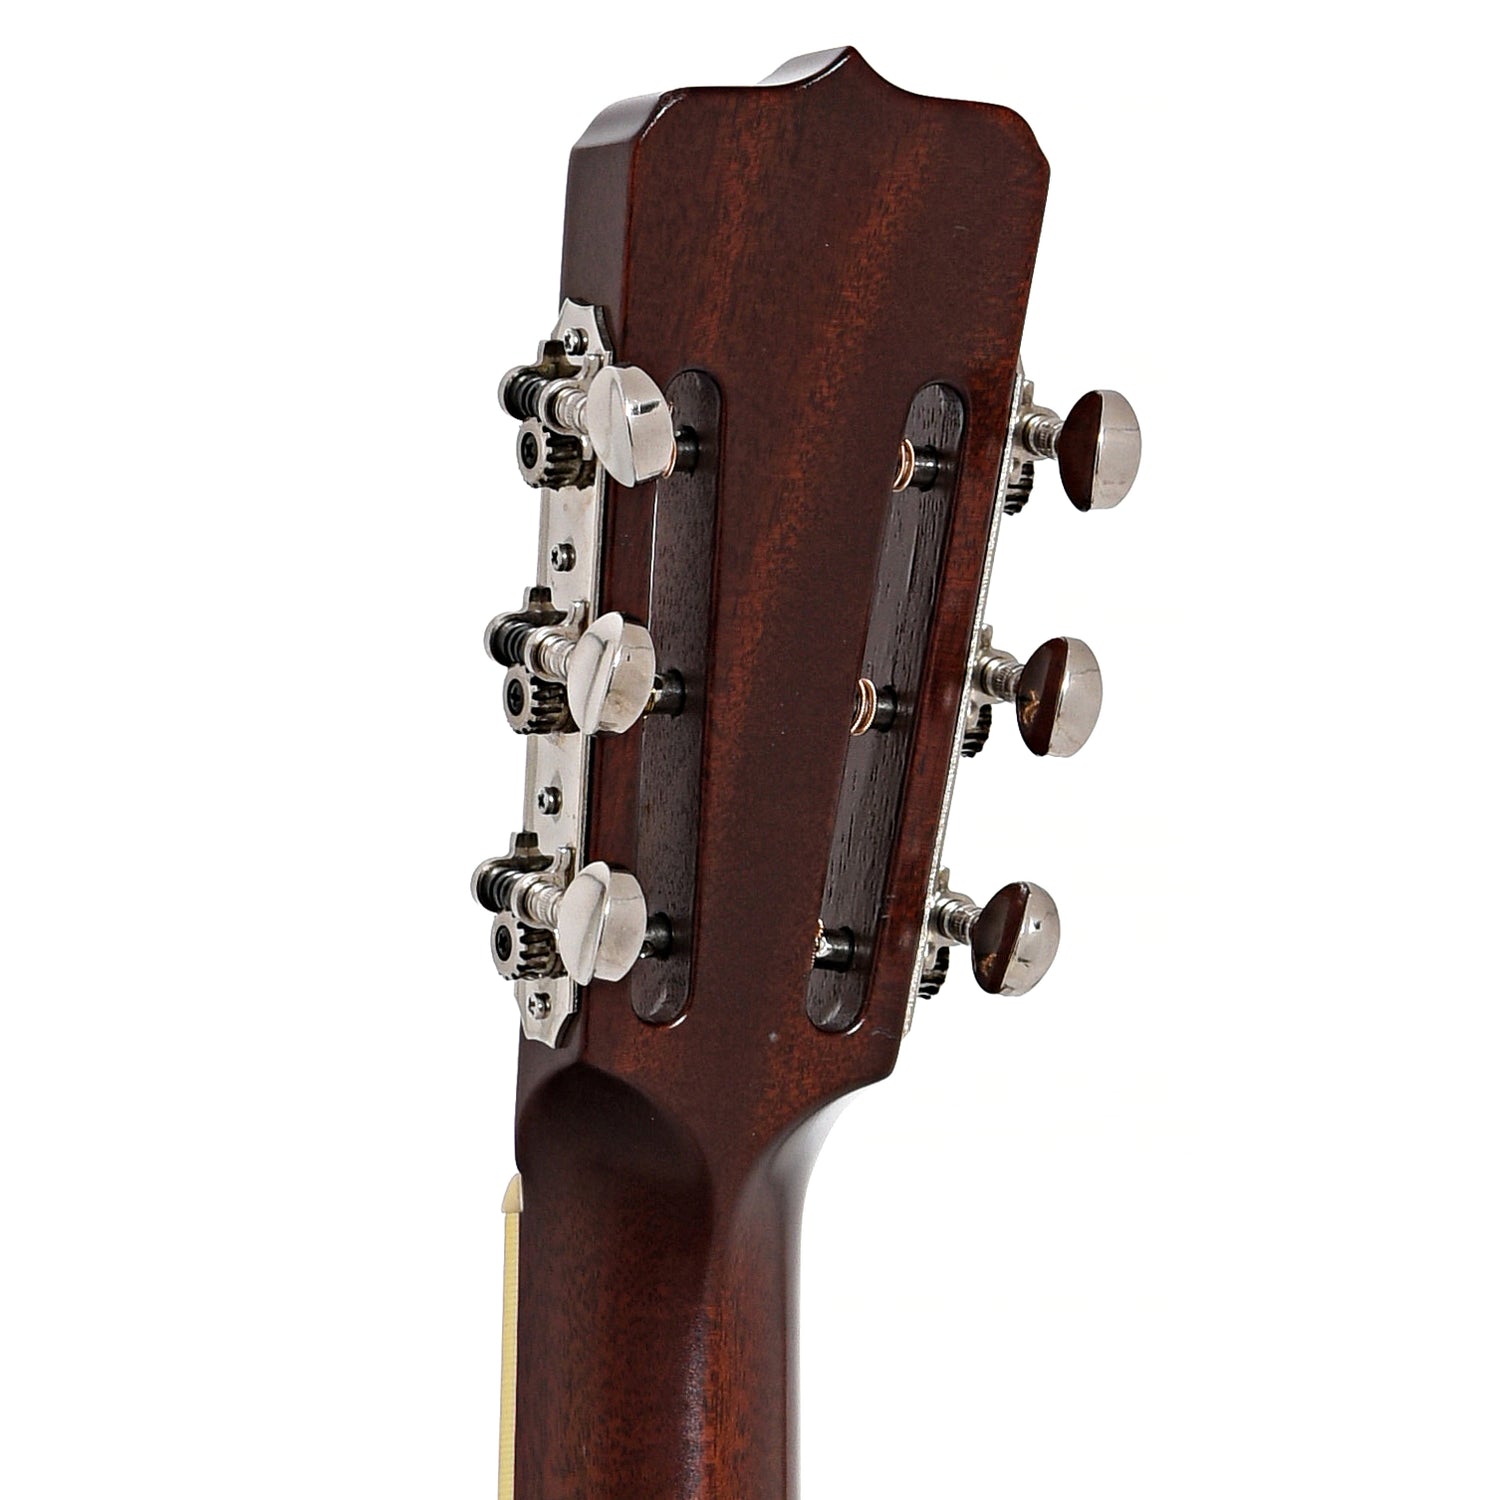 Back headstock of National Style 1 Tricone 